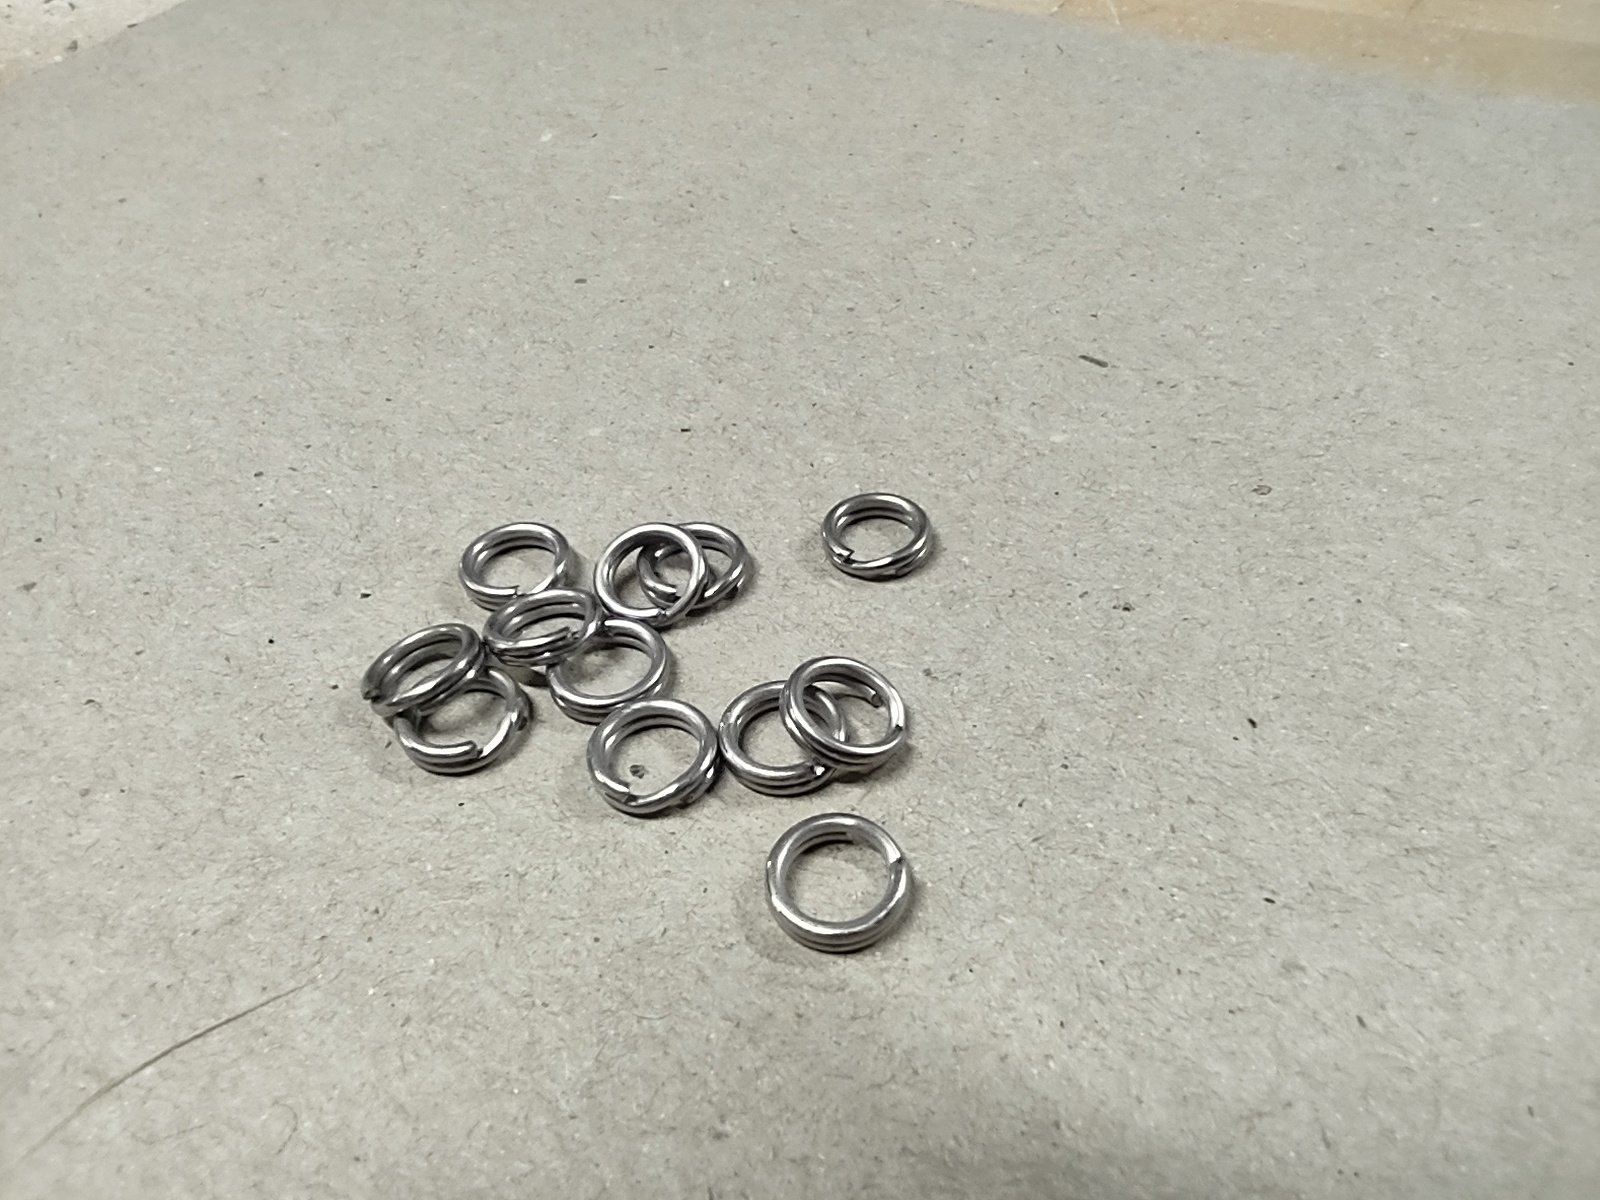 Replacement split rings - not very exciting I grant you, but it's